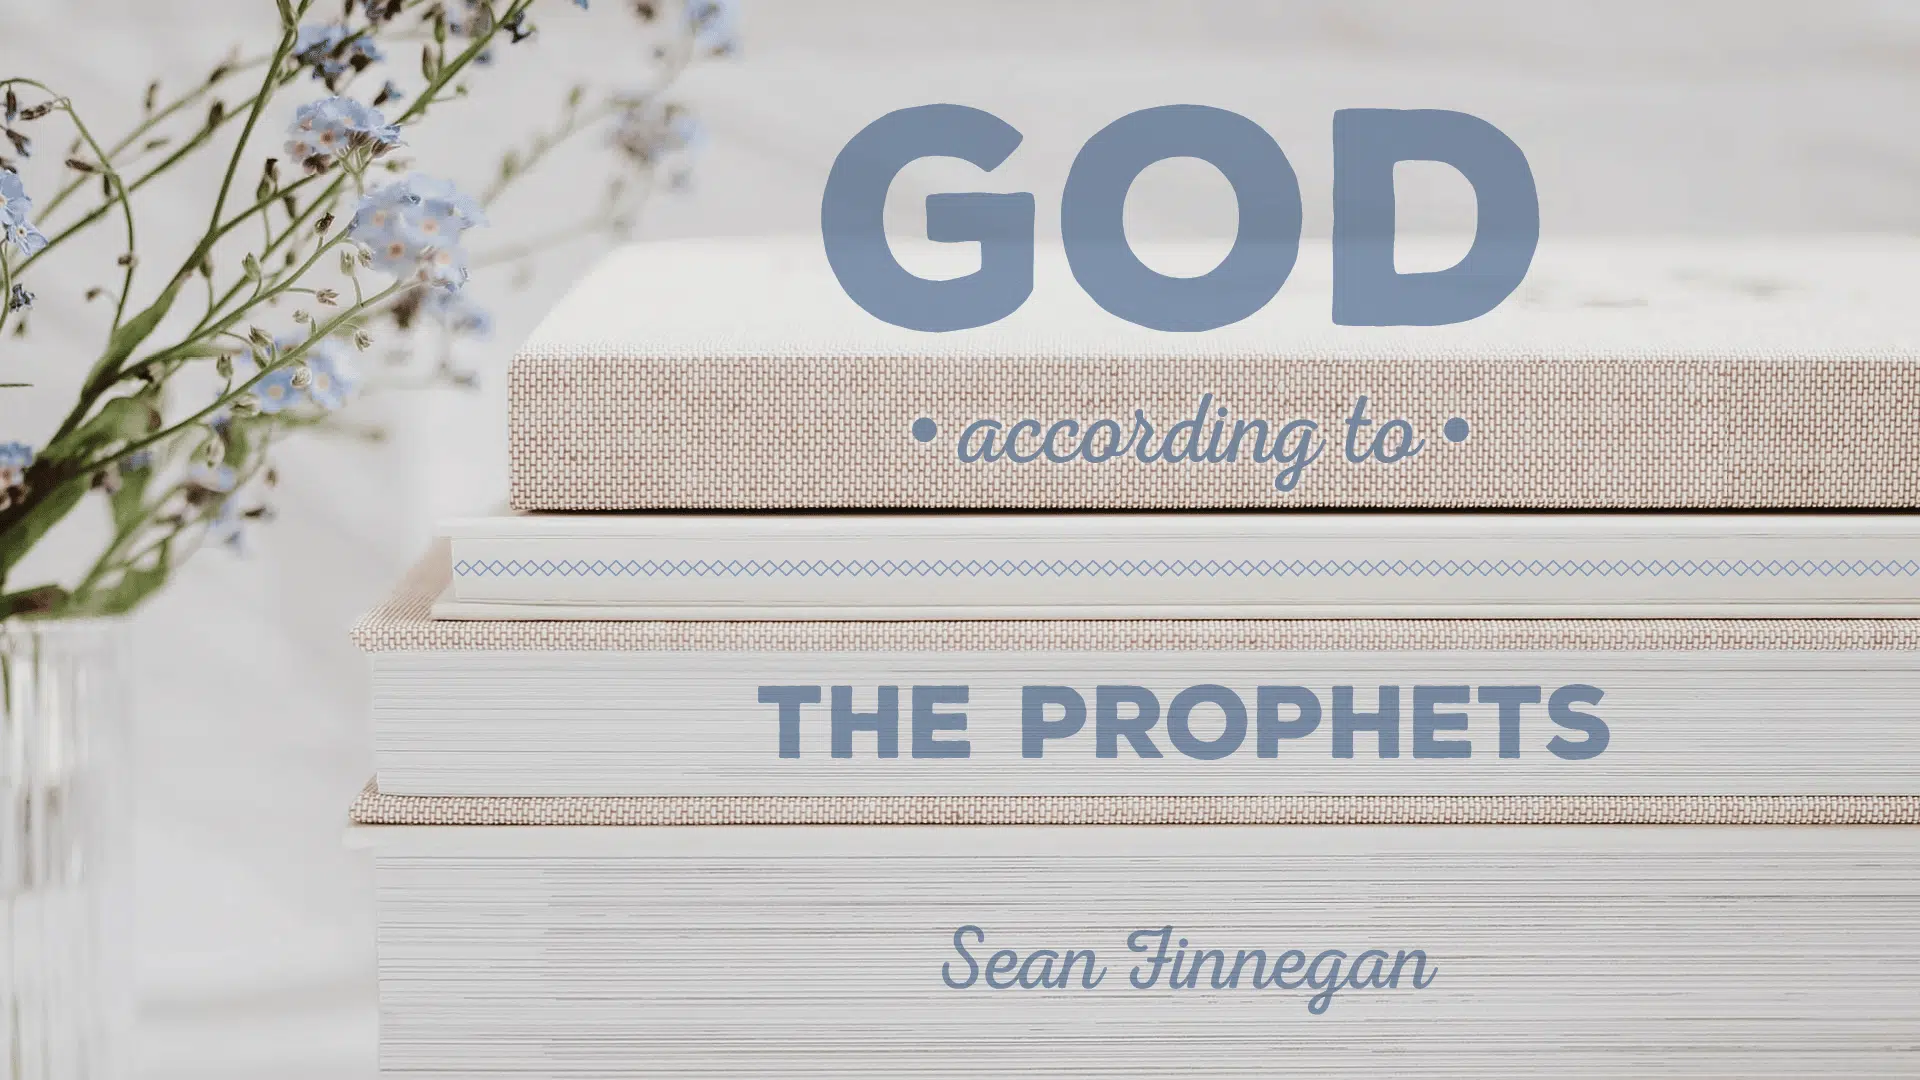 God According to the Prophets